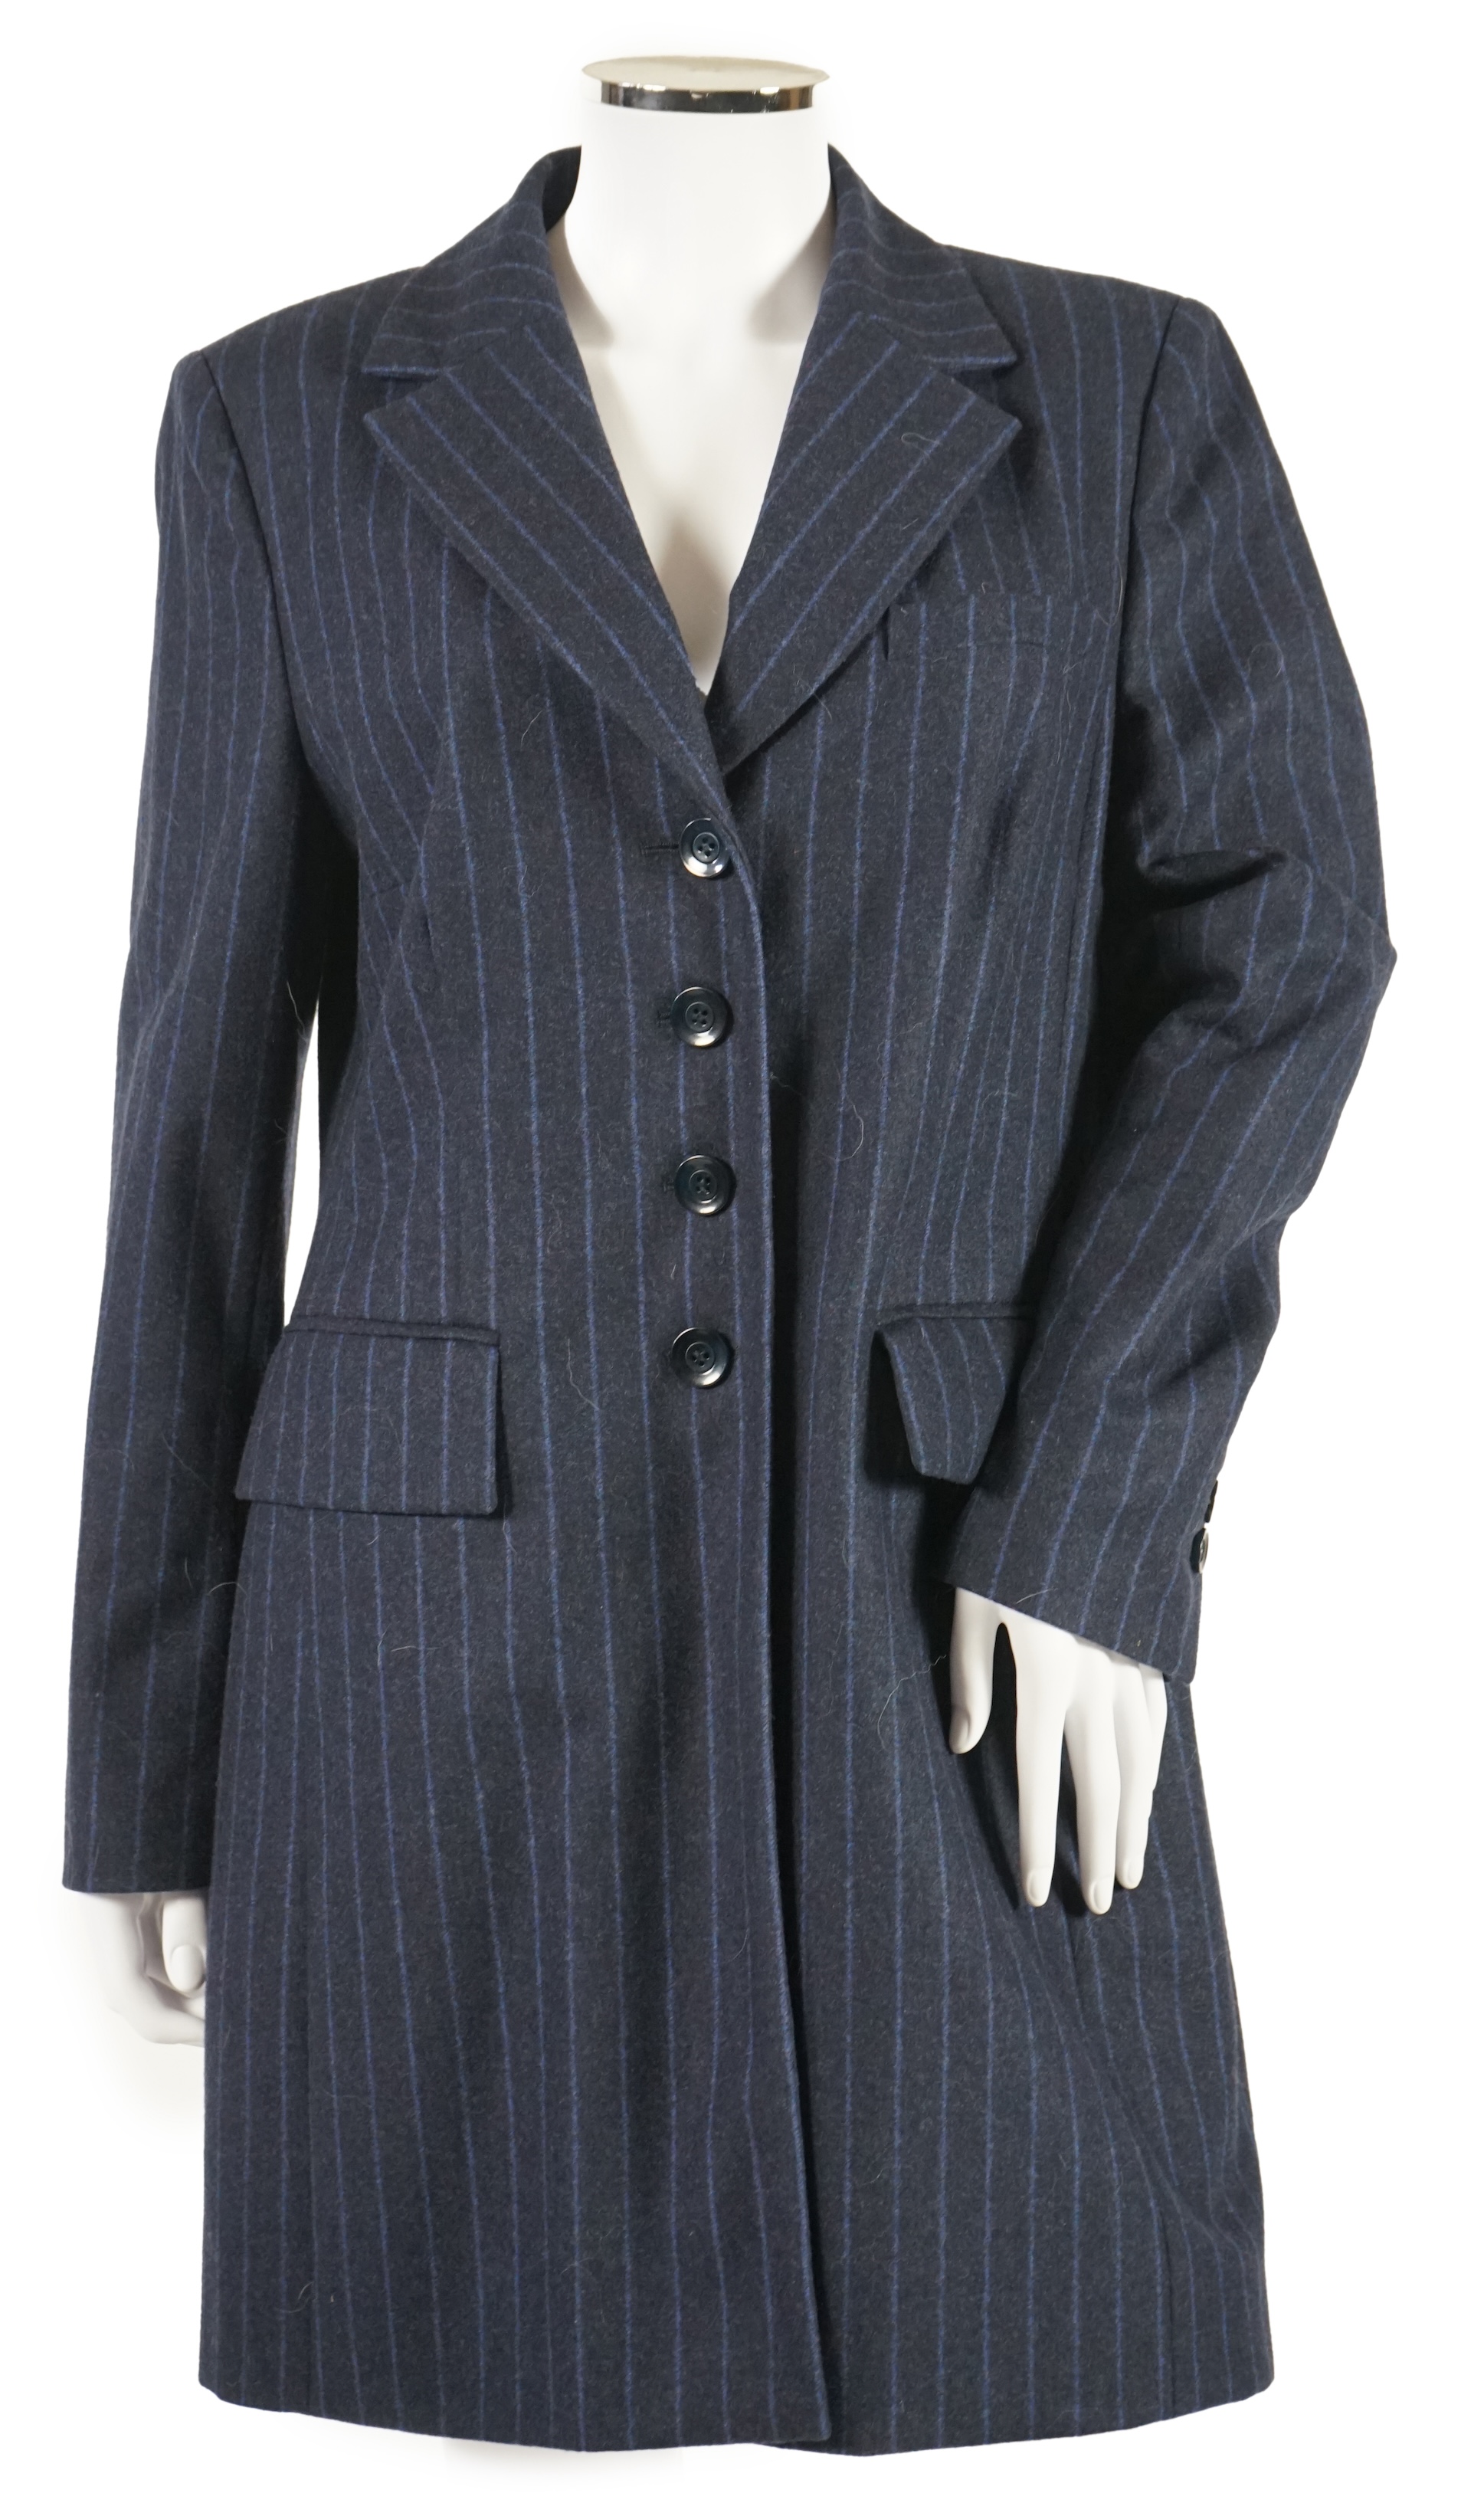 An Elegance lady's trench coat, a velvet jacket and a wool blazer. Approx sizes 14 - 16 Proceeds to Happy Paws Puppy Rescue